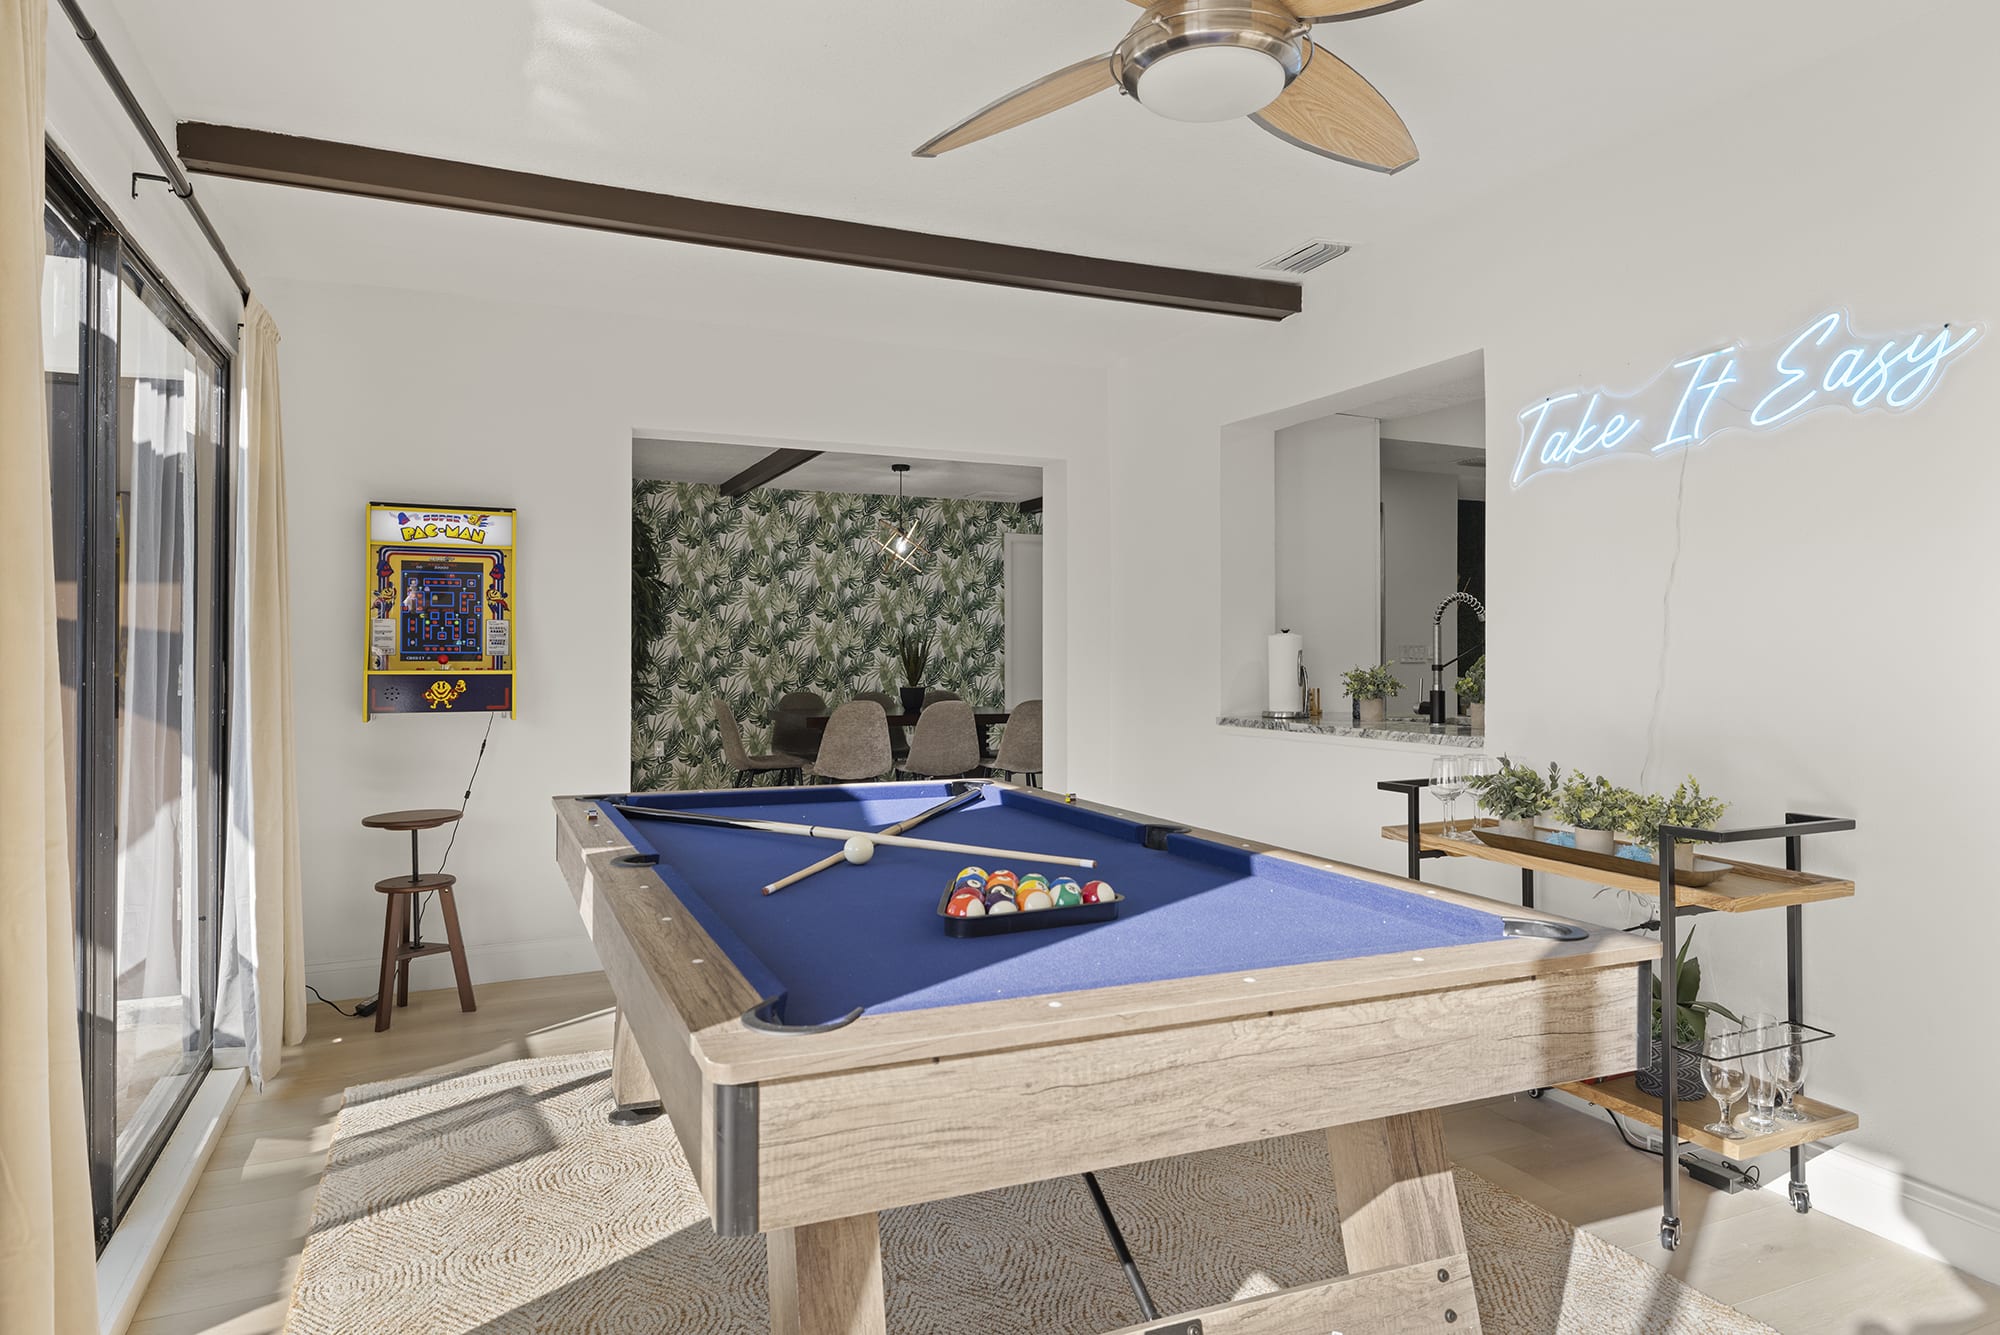 Game Room w/ Pool Table